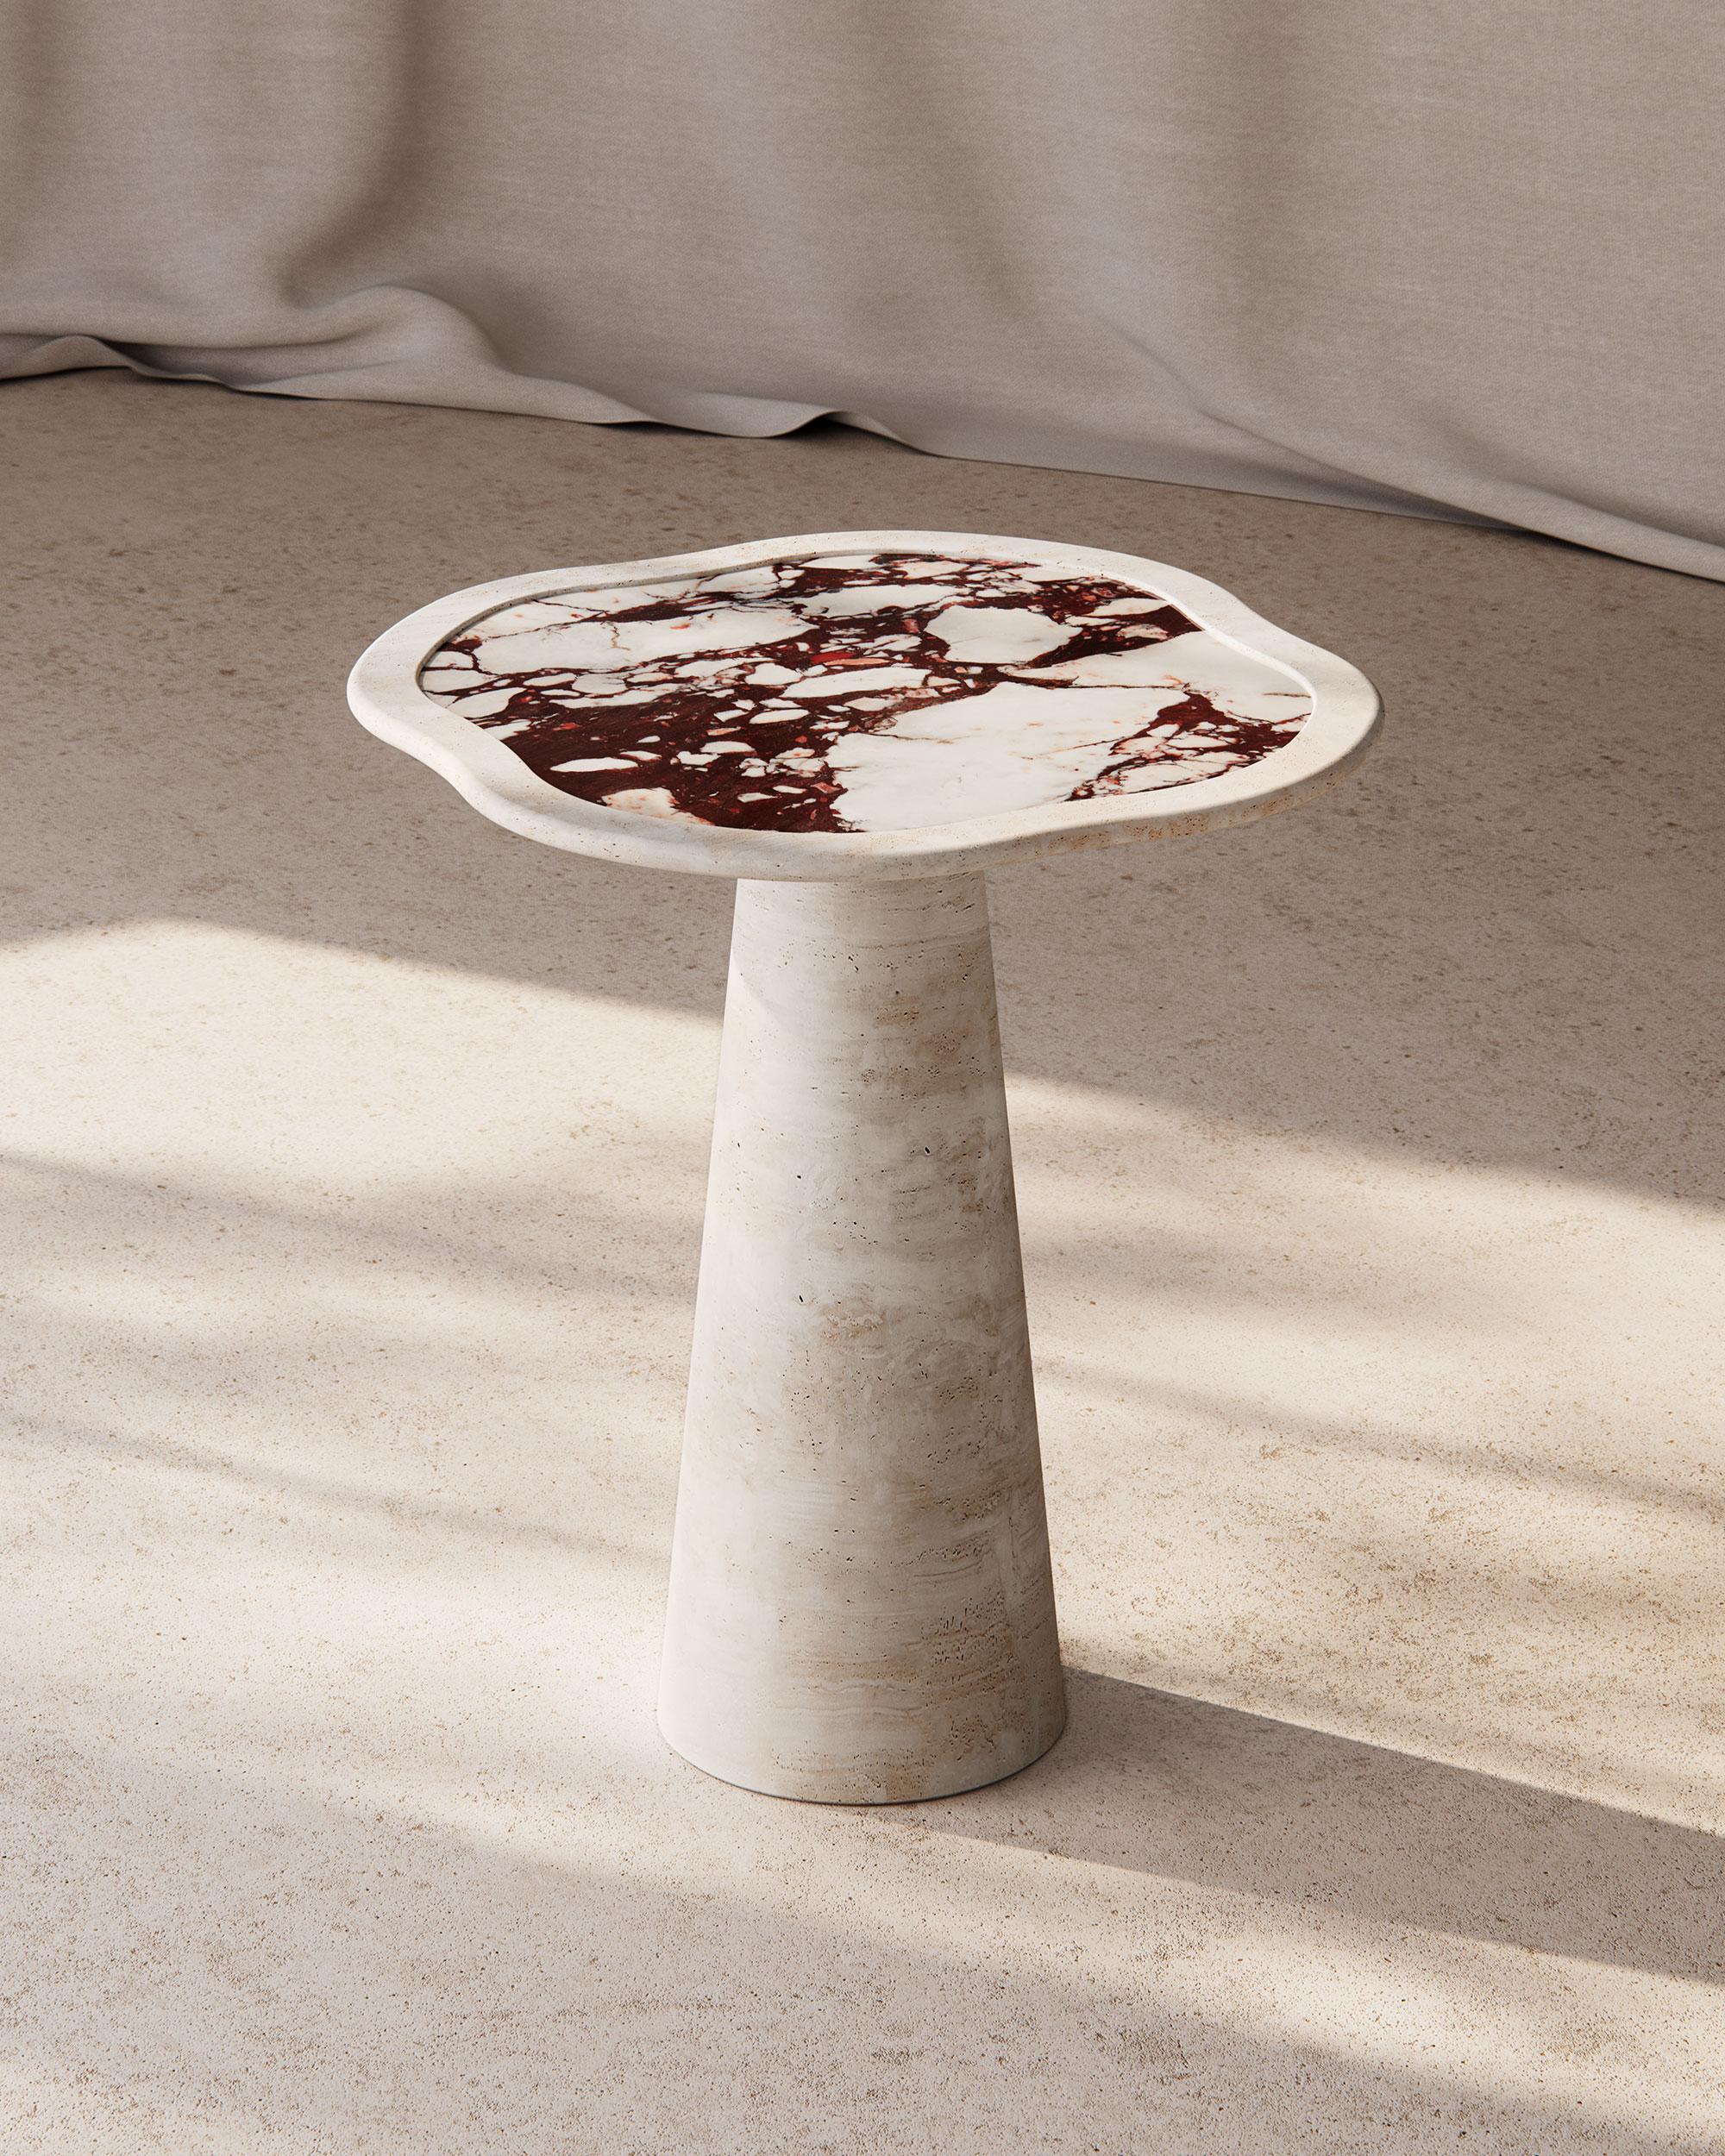 The Cupid Foyer Table by The Essentialist, elegantly crafted from Italian Ivory Travertine and adorned with a Calacatta Viola inlay, is an object d'art that strikes an alluring harmony between form and material. Its organic silhouette, graced with